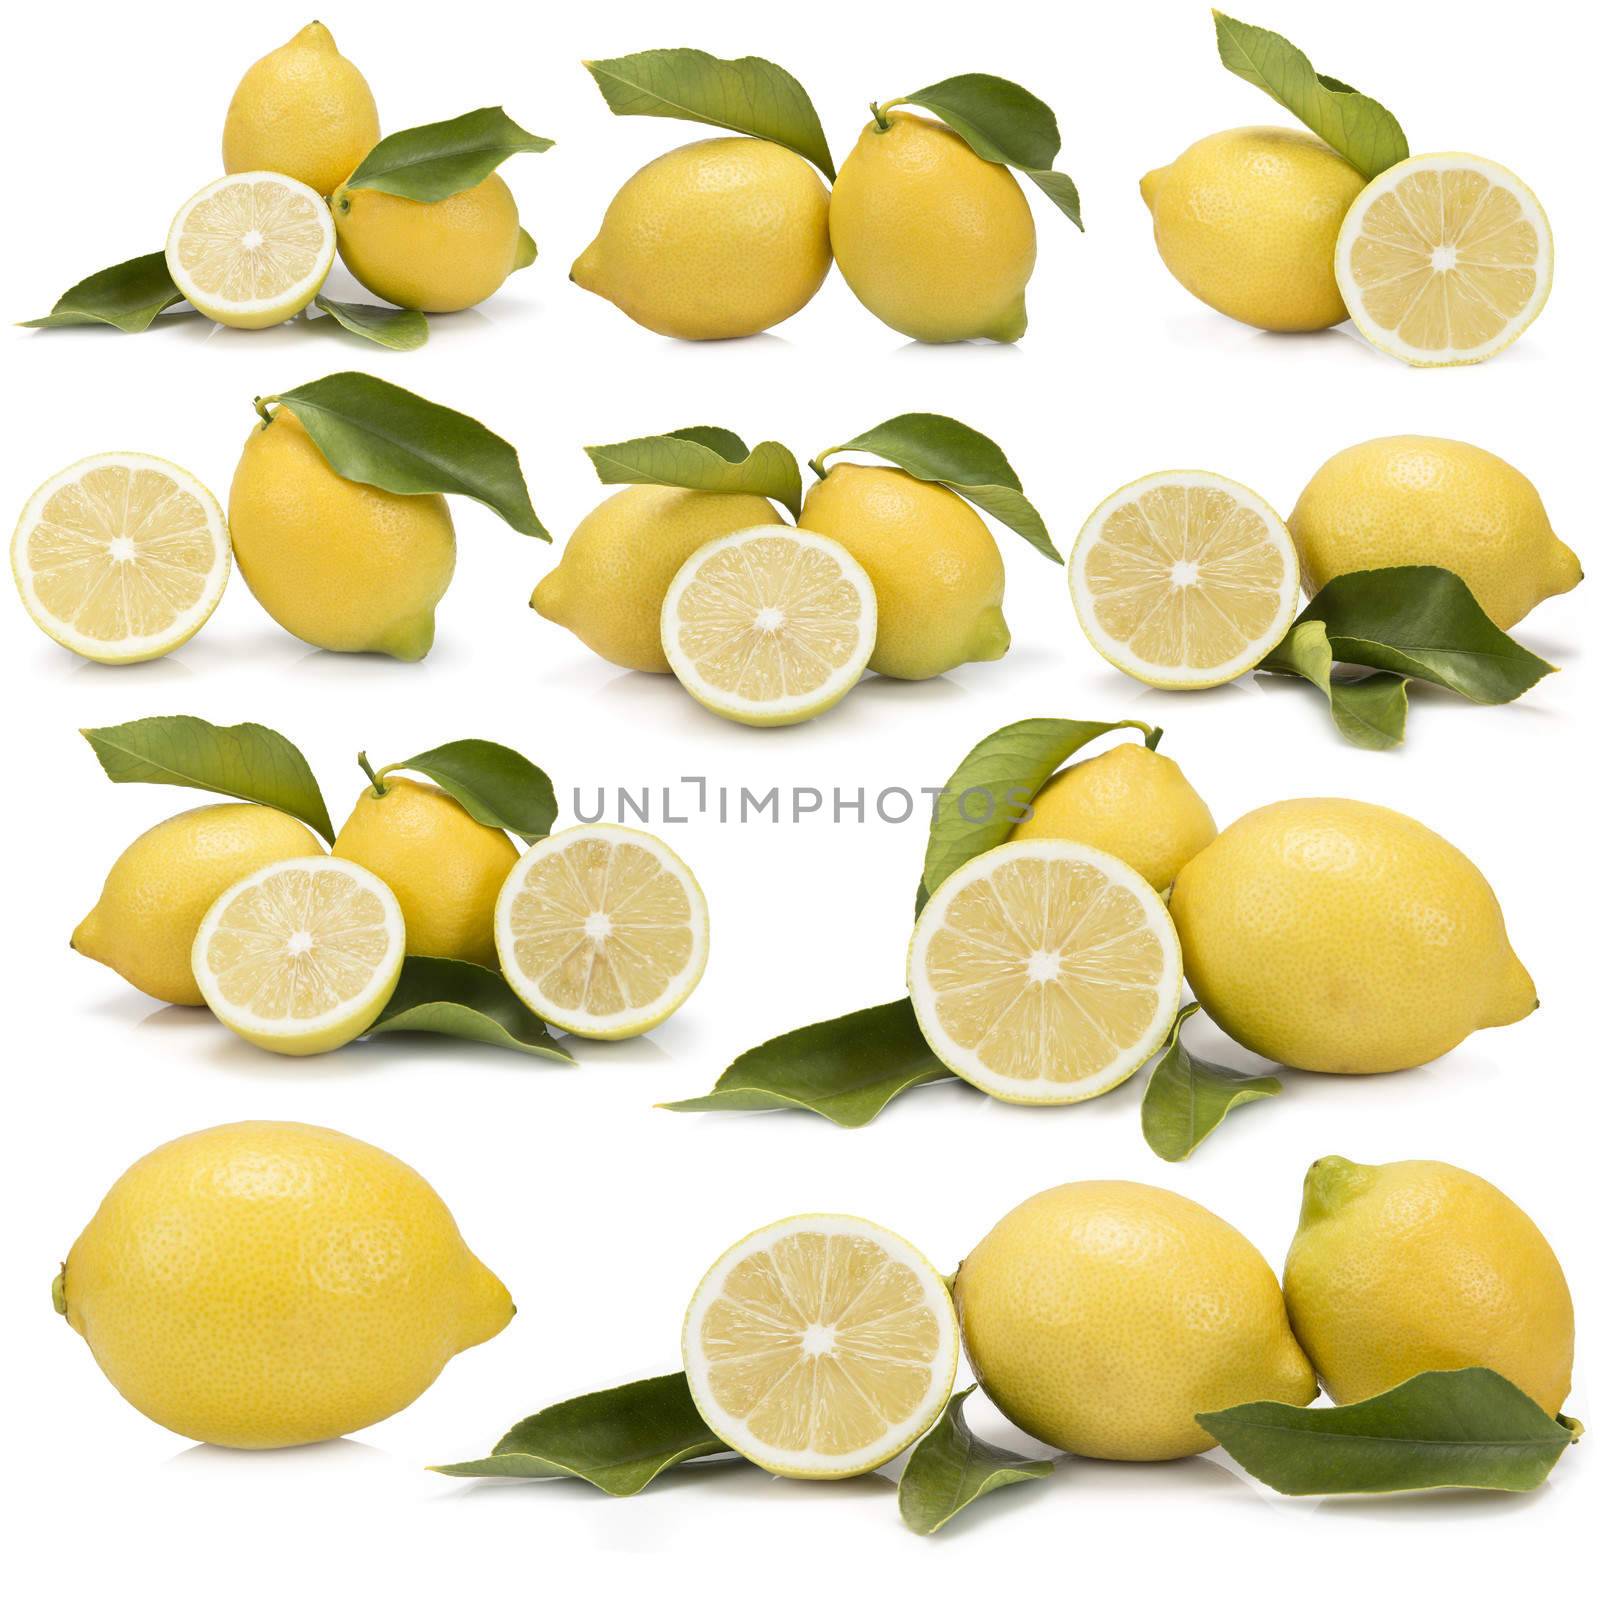 Great set of photographs of lemons with leaves isolated over a white background